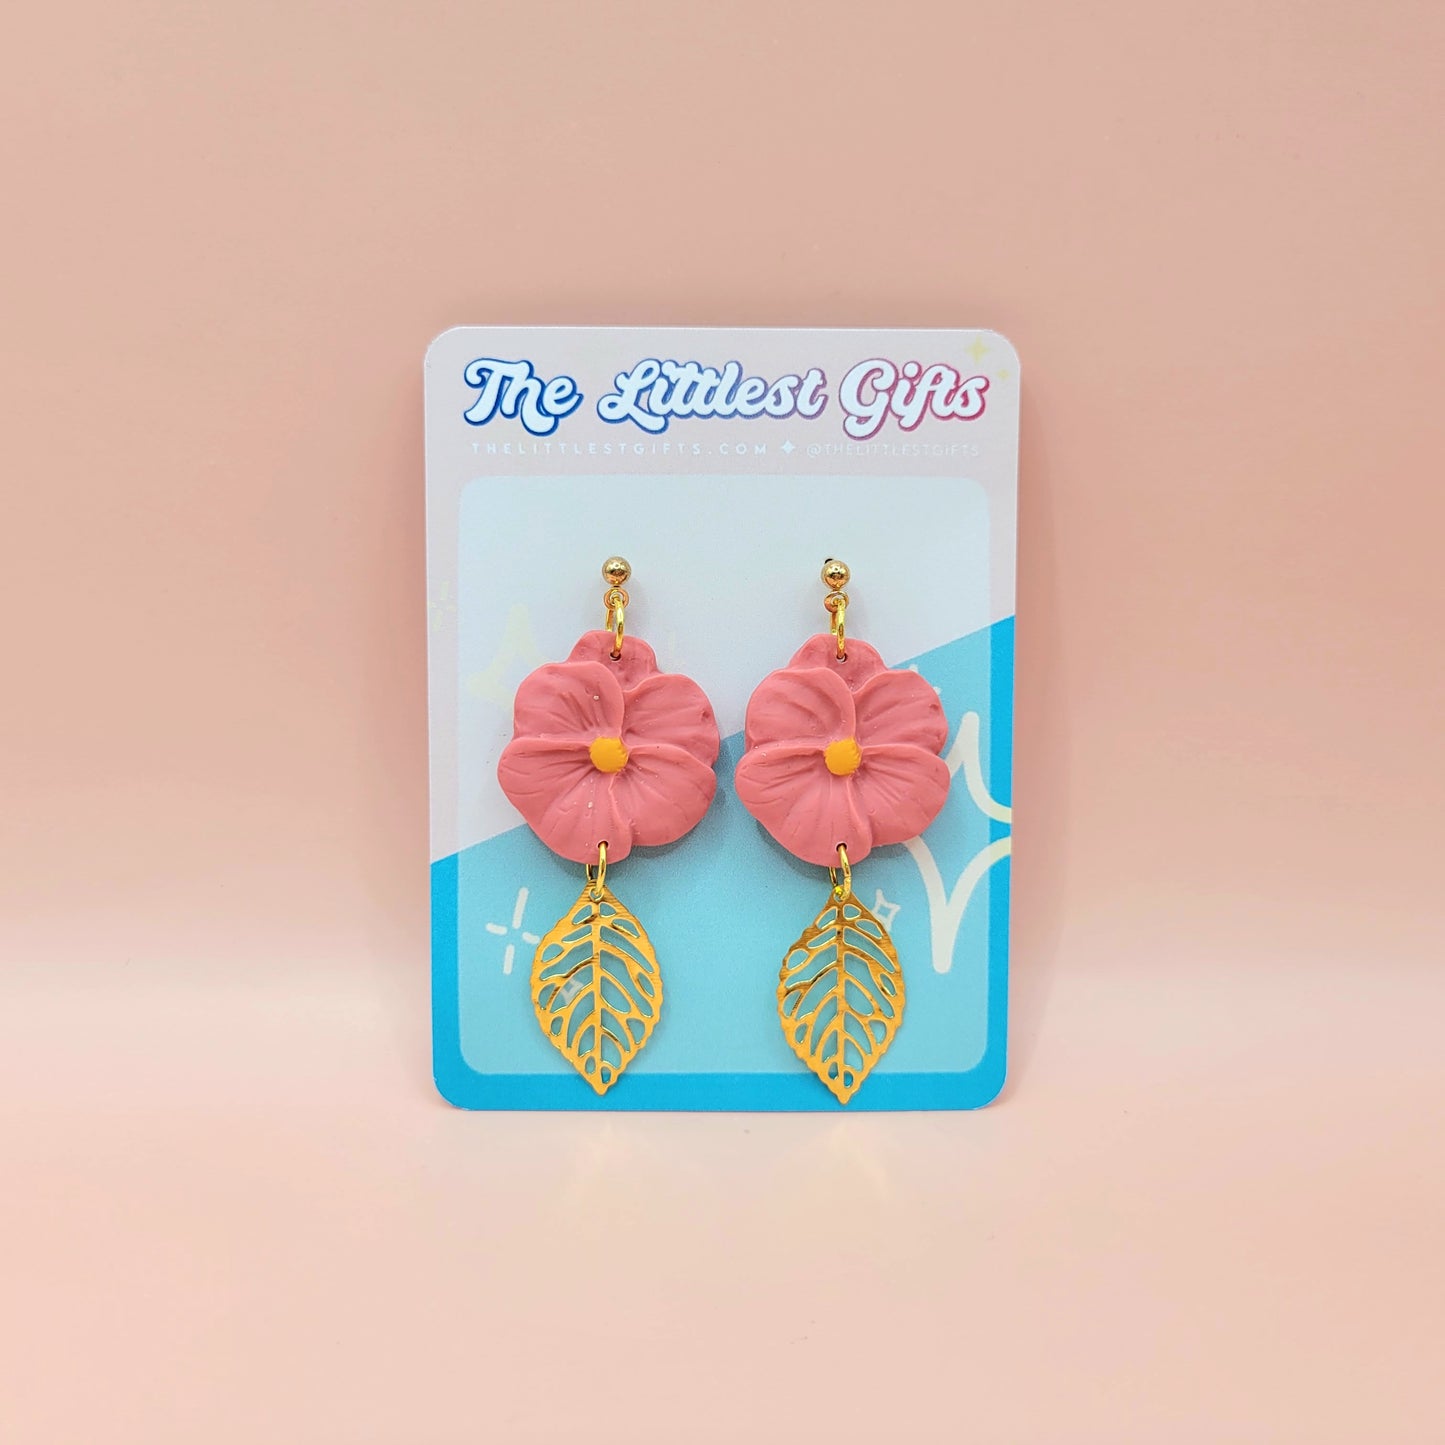 Pink Flower with Gold Leaf - Handmade Clay Earrings